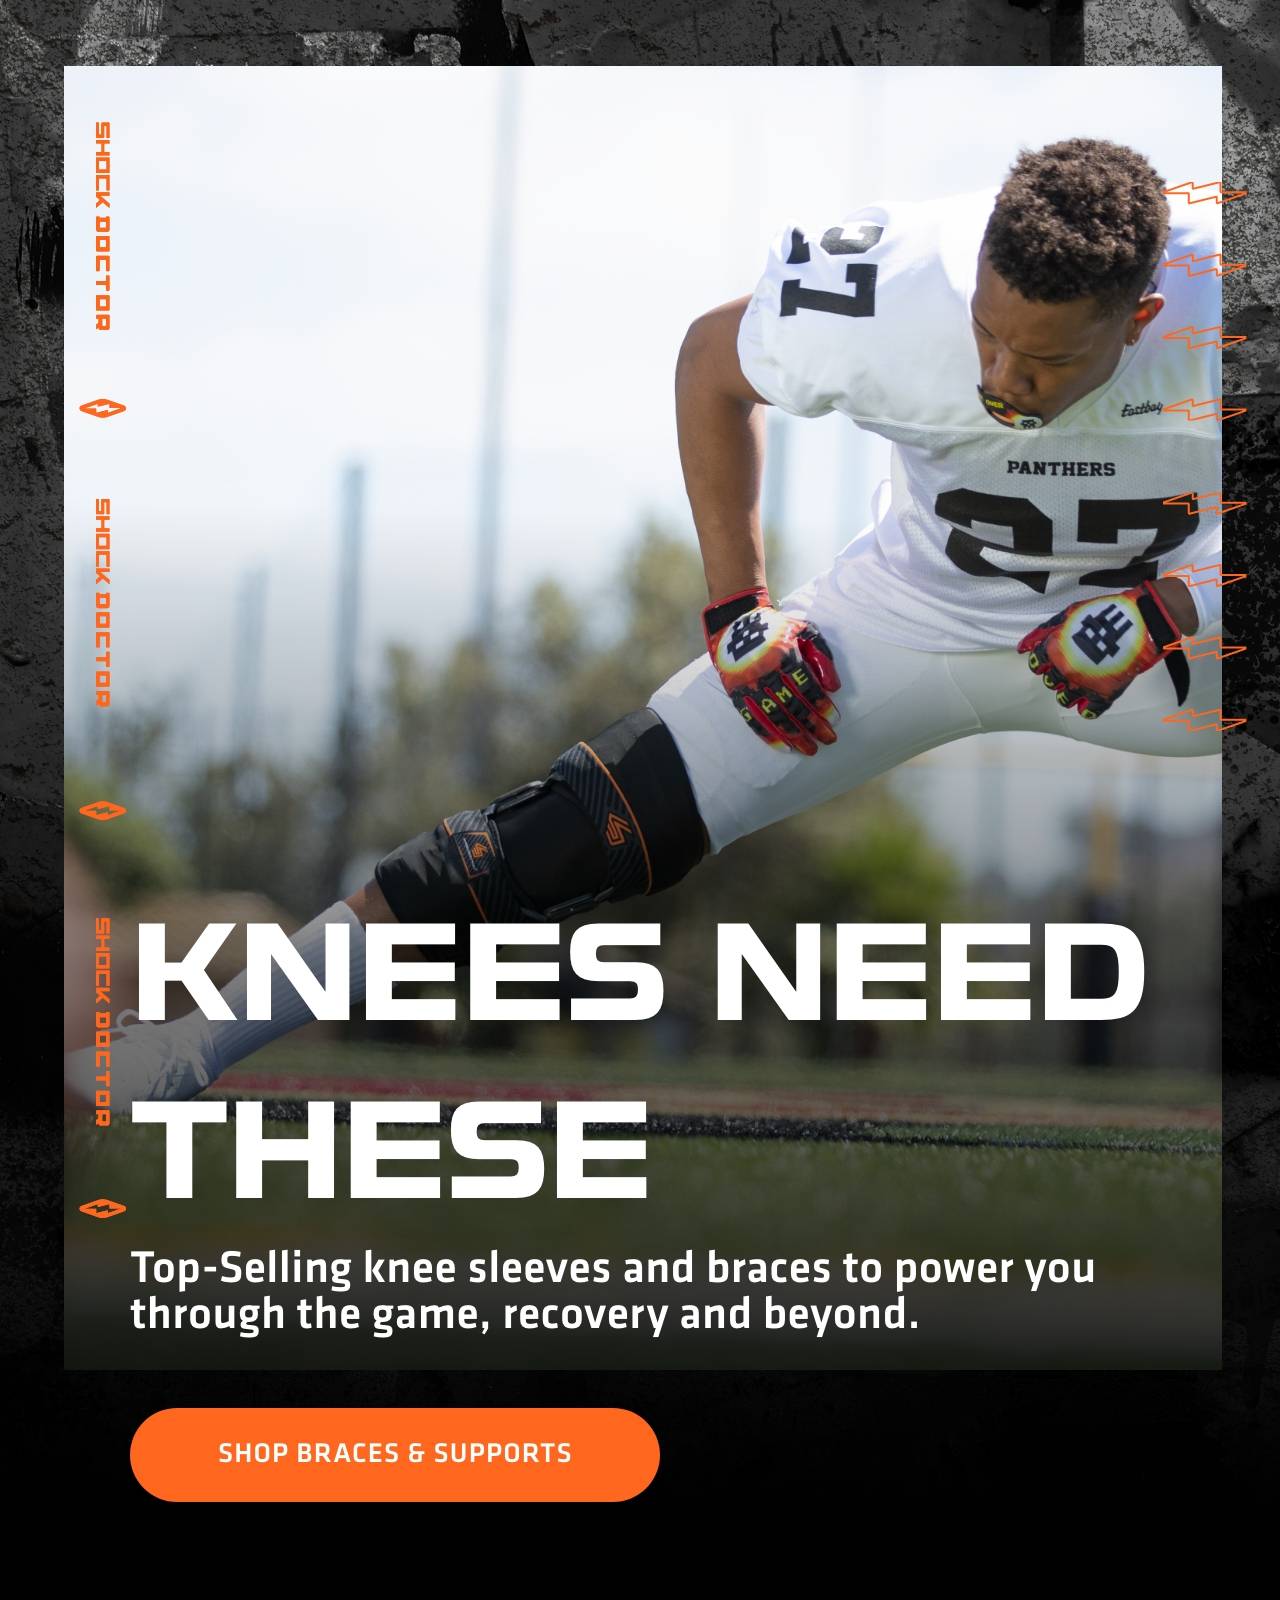 Knees need these. Top-selling knee sleeves and braces to power you through the game, recovery and beyond. Shop braces & supports